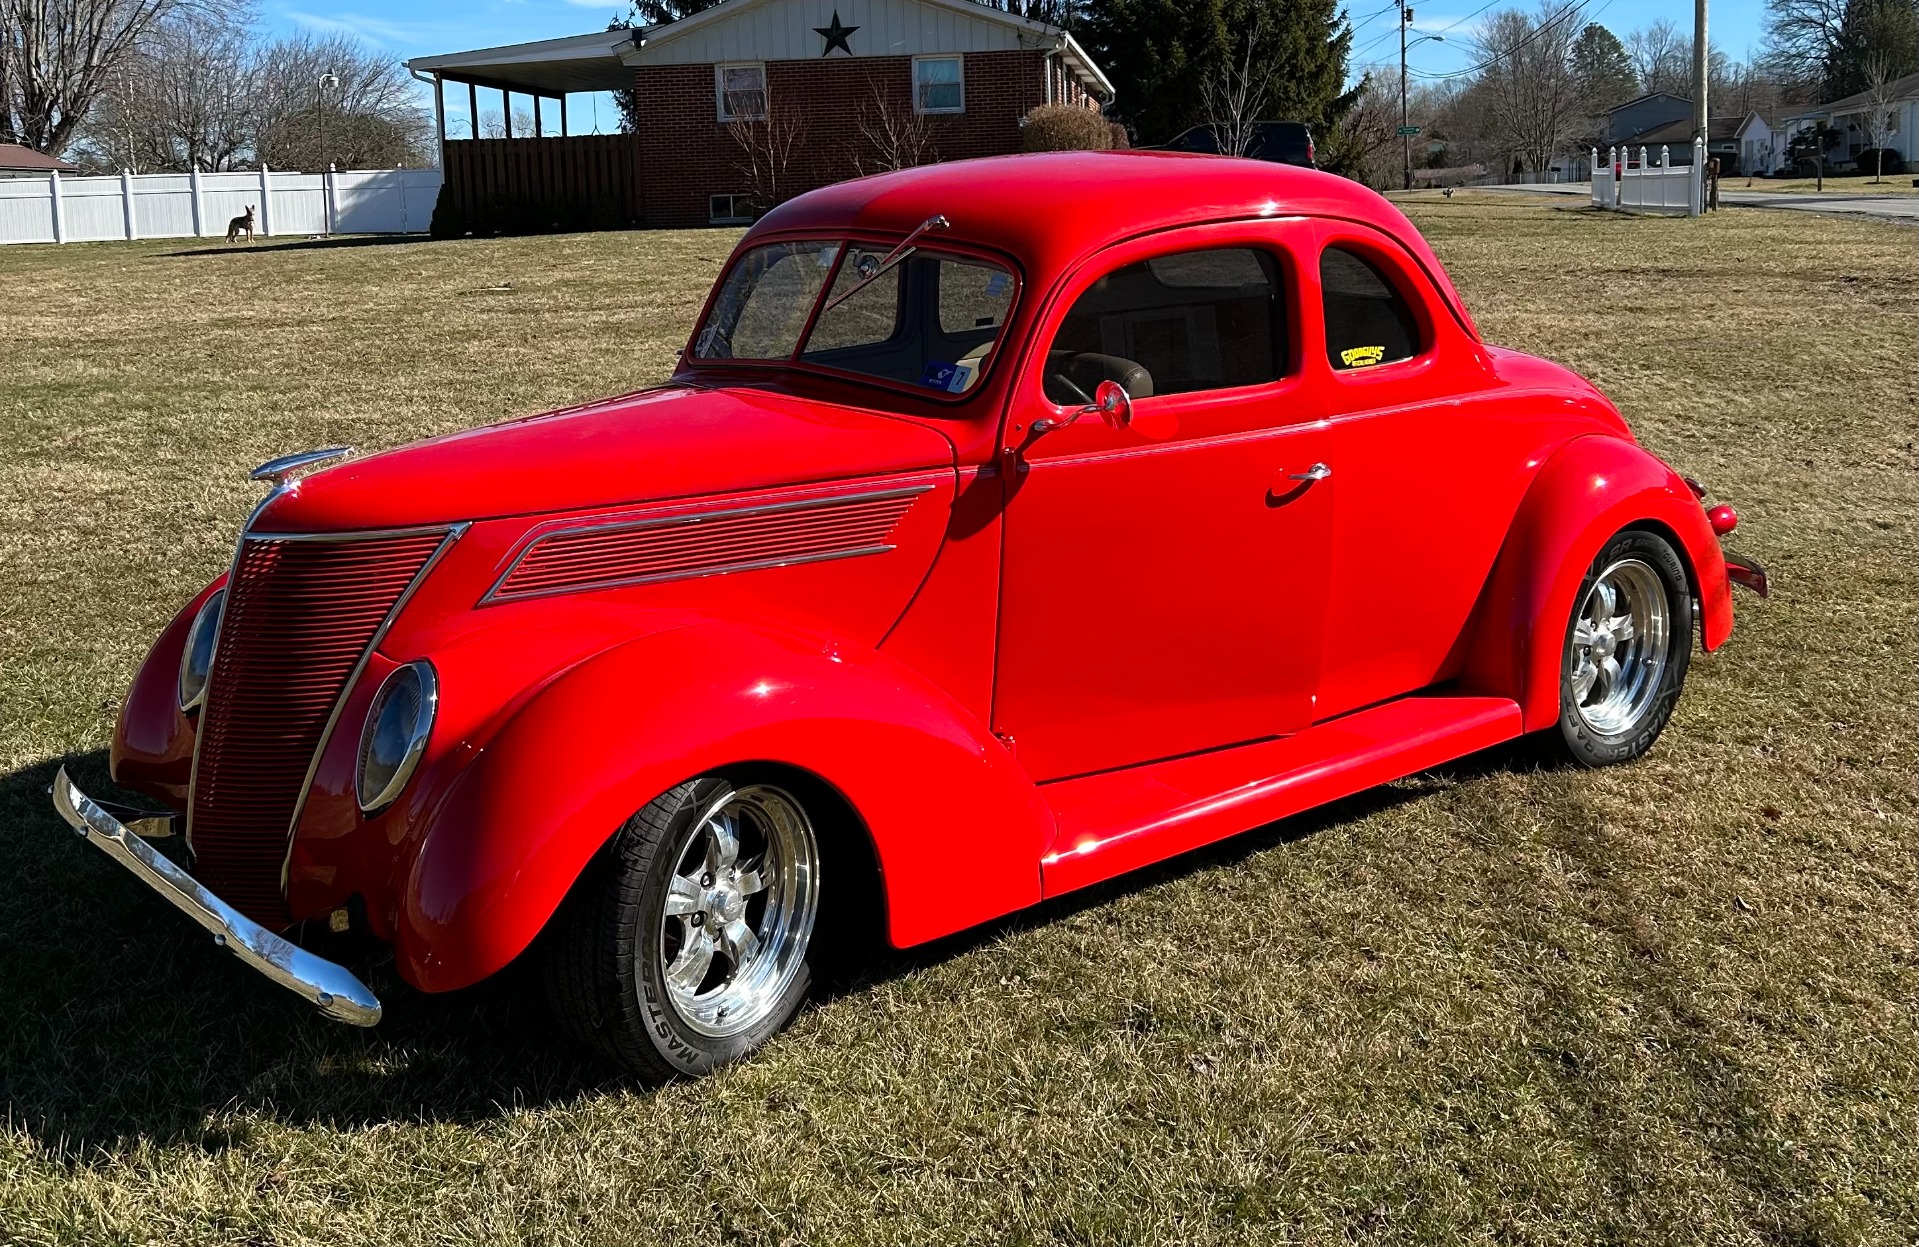 Used 1937 Ford 5 Window Coupe  262 , For Sale $67000, Call Us: (704) 996-3735